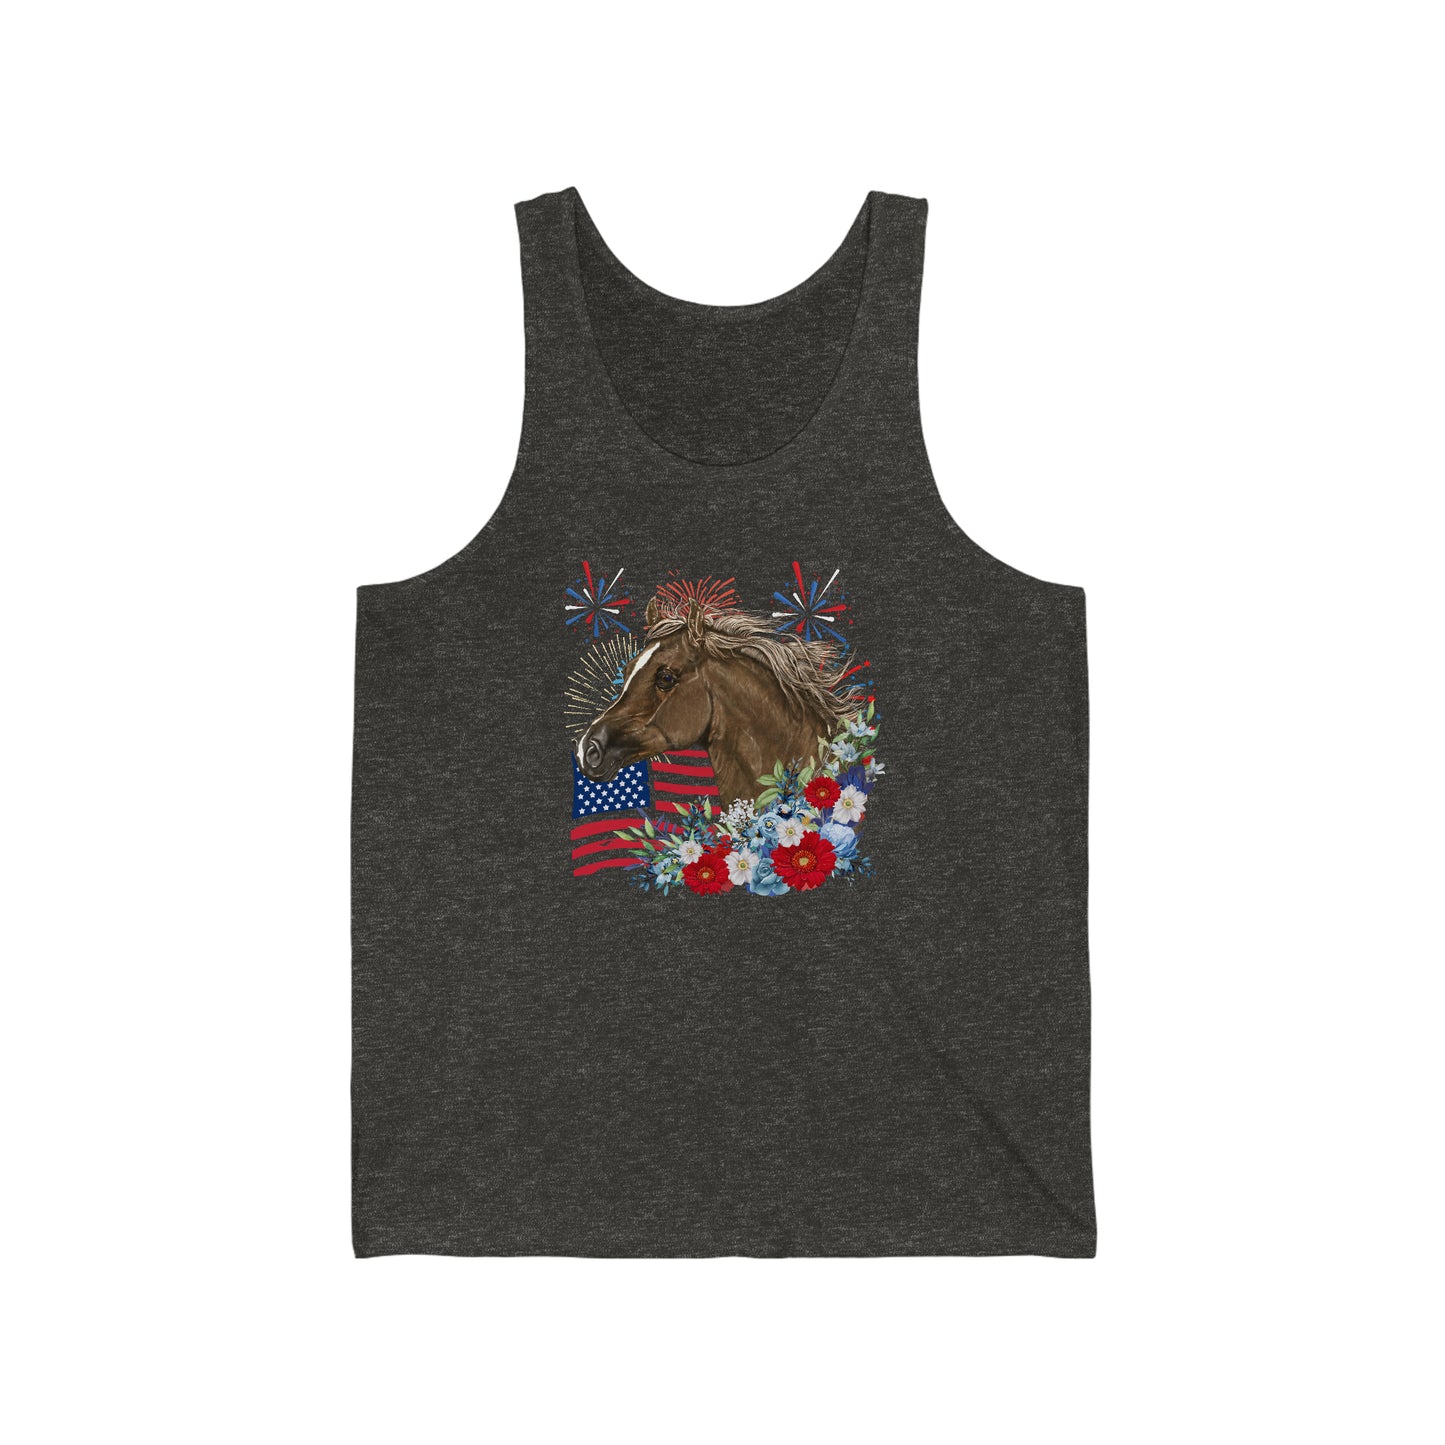 Patriotic Horse Tank Top with American Flag and Fireworks Graphic